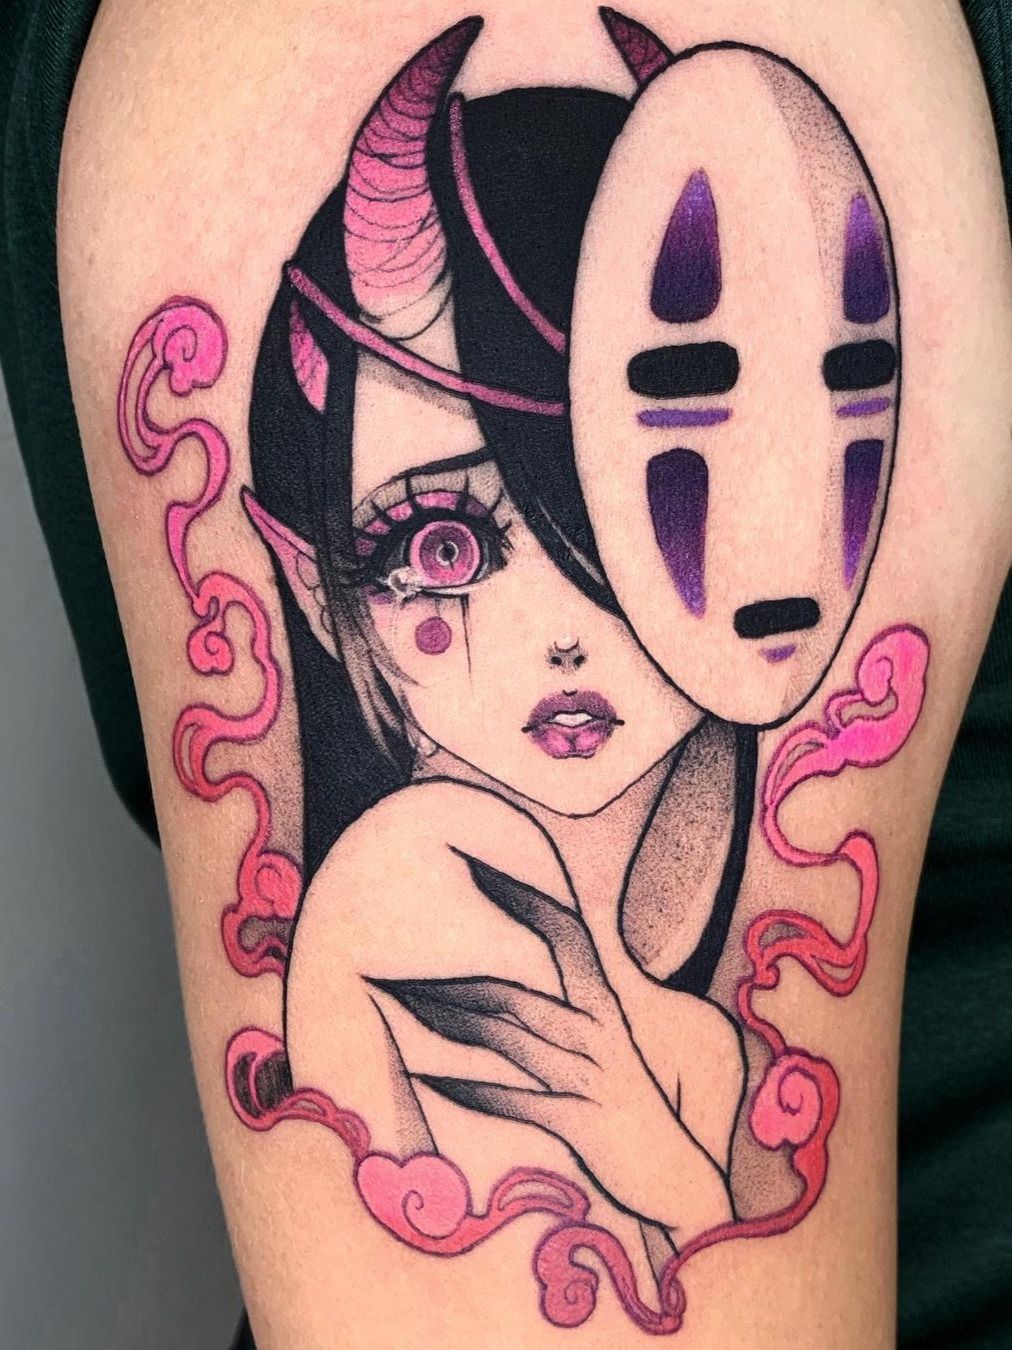 Anime Girls ❤️ tattoos done by @xomeink To submit your work use the tag  #animemasterink And don't forget to share our page too! #s... | Instagram